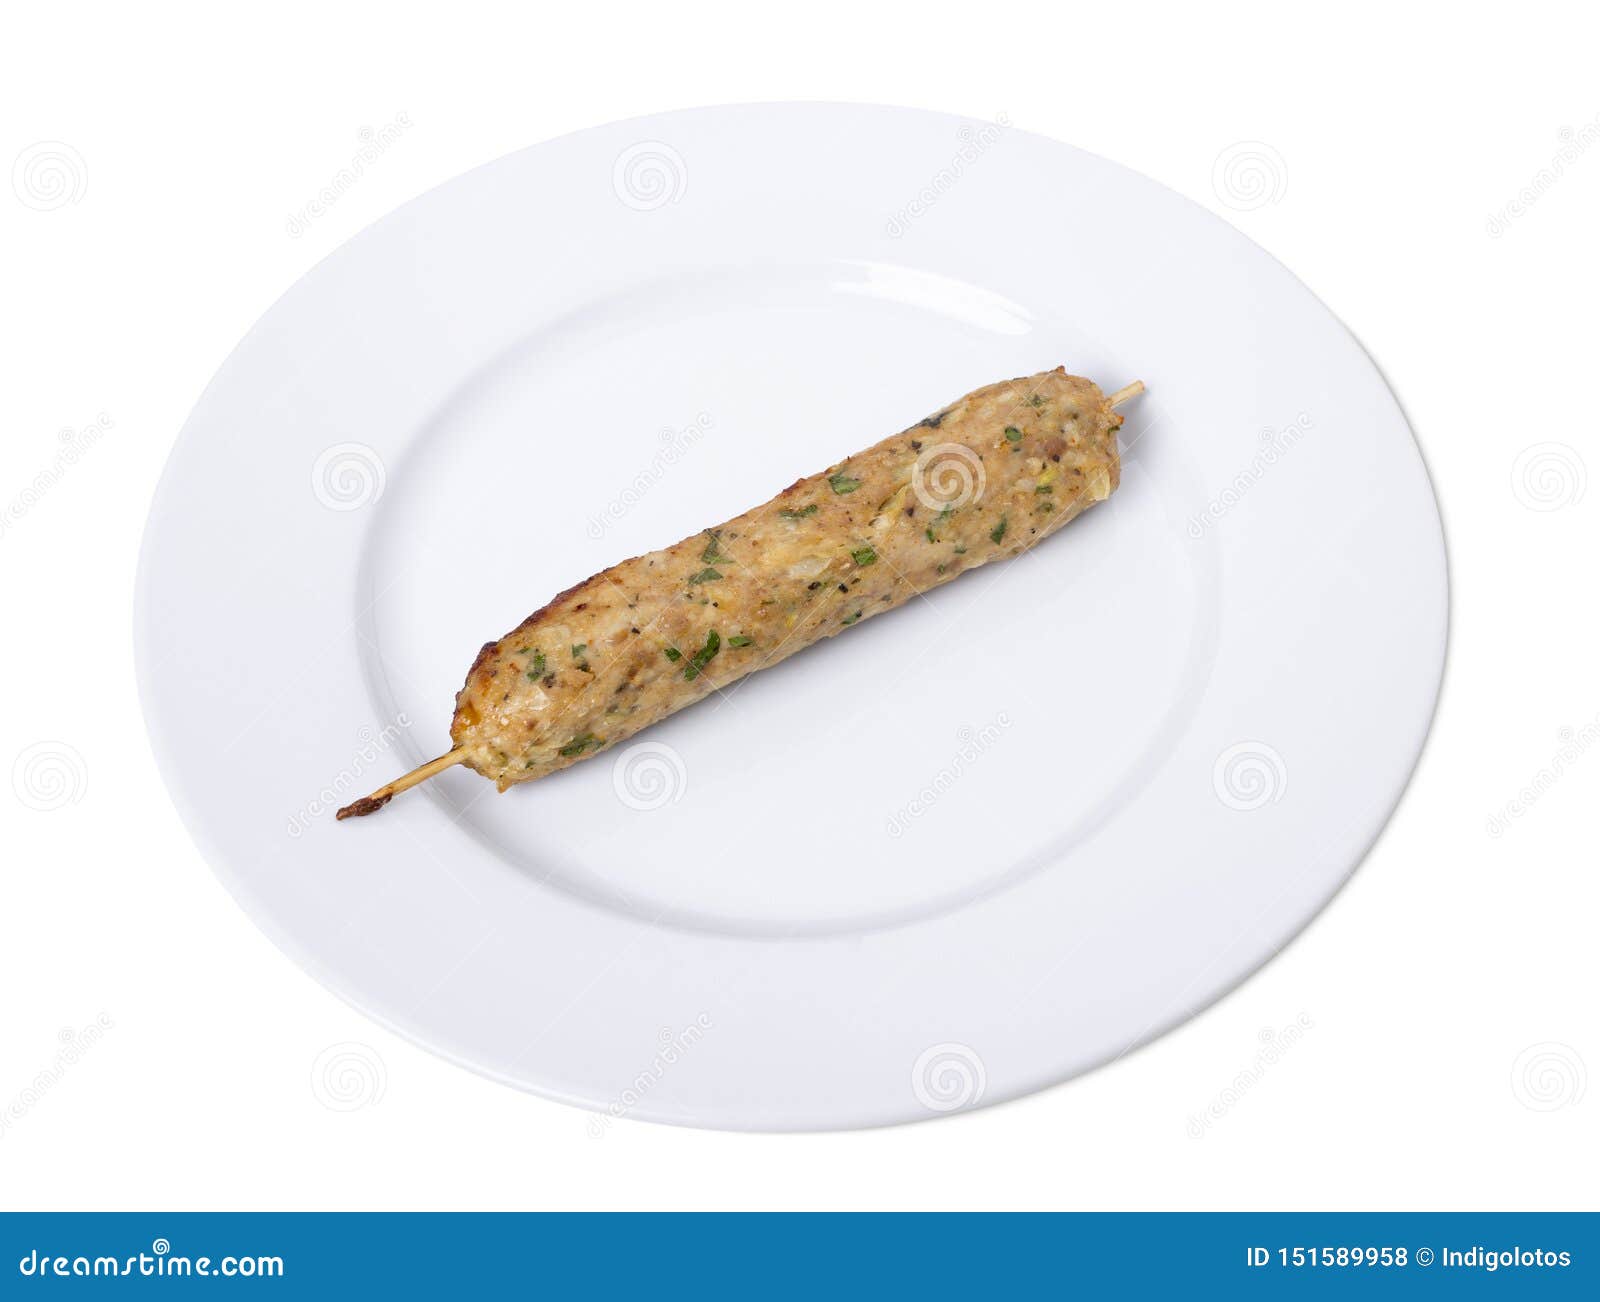 delicios chicken lula kebab on a white plate.